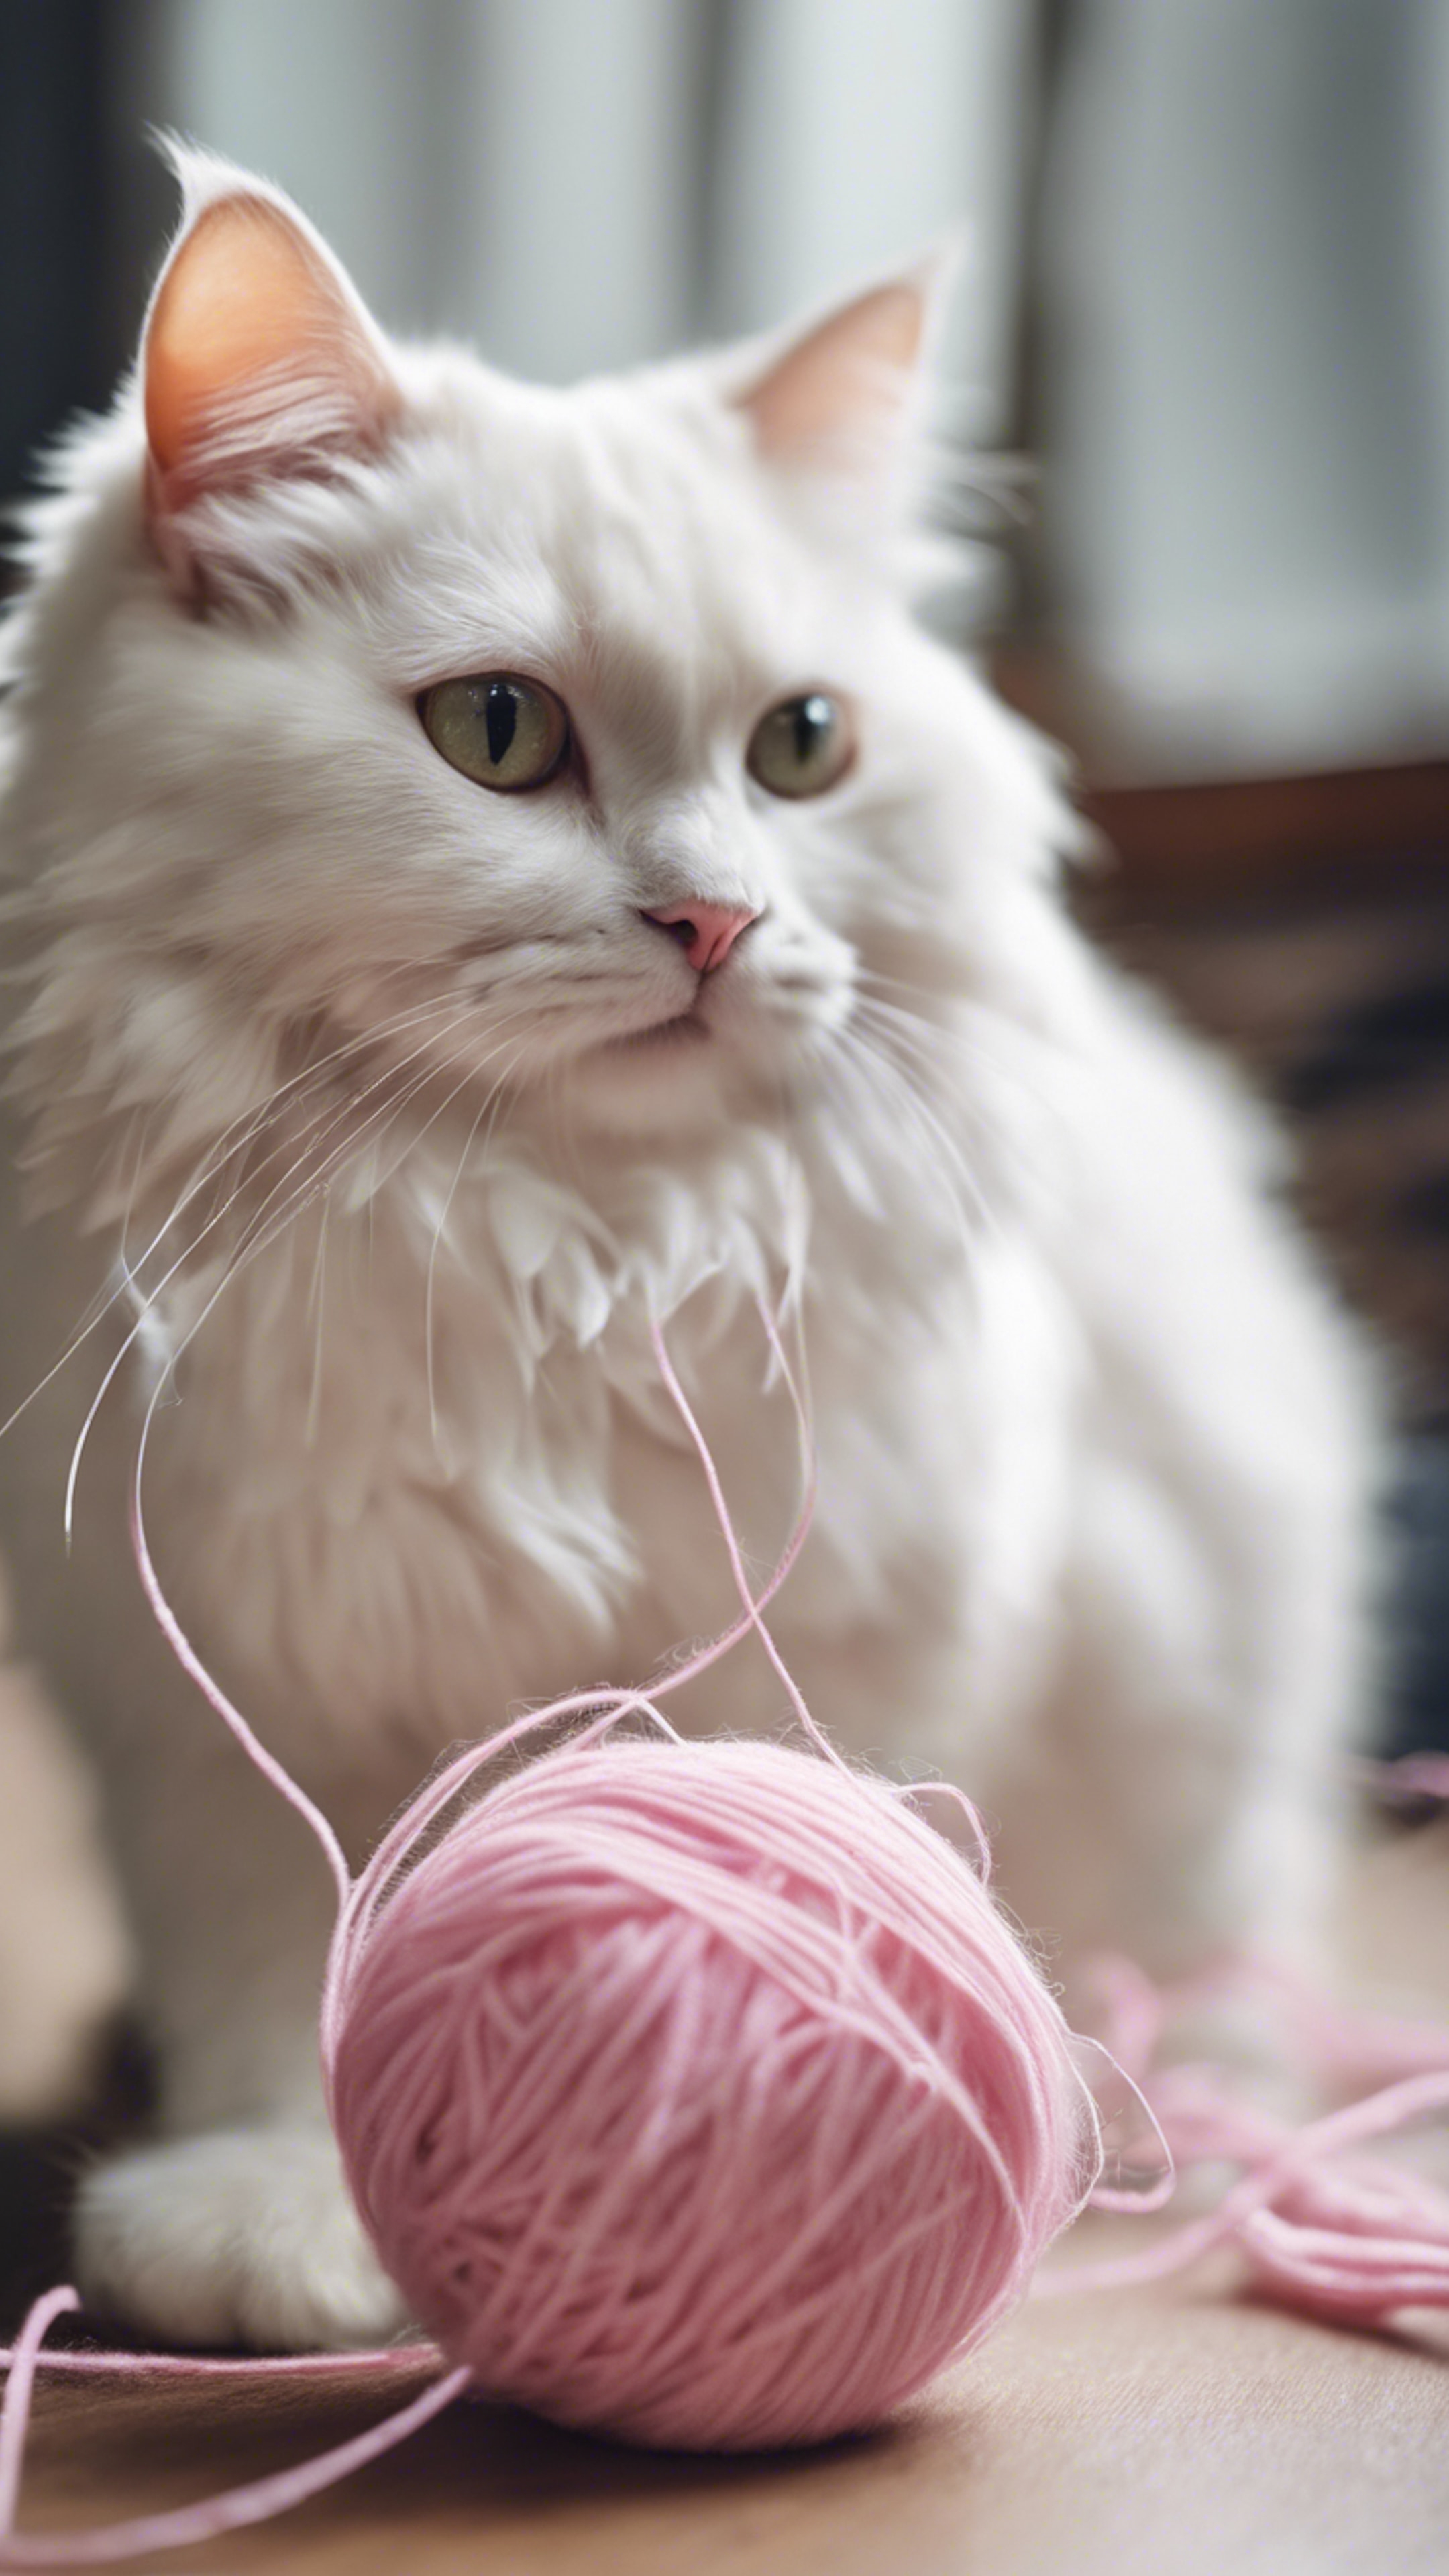 An adorable white cat, fluff all around, playing with a pink ball of yarn. Papel de parede[2f9056787526421e963d]